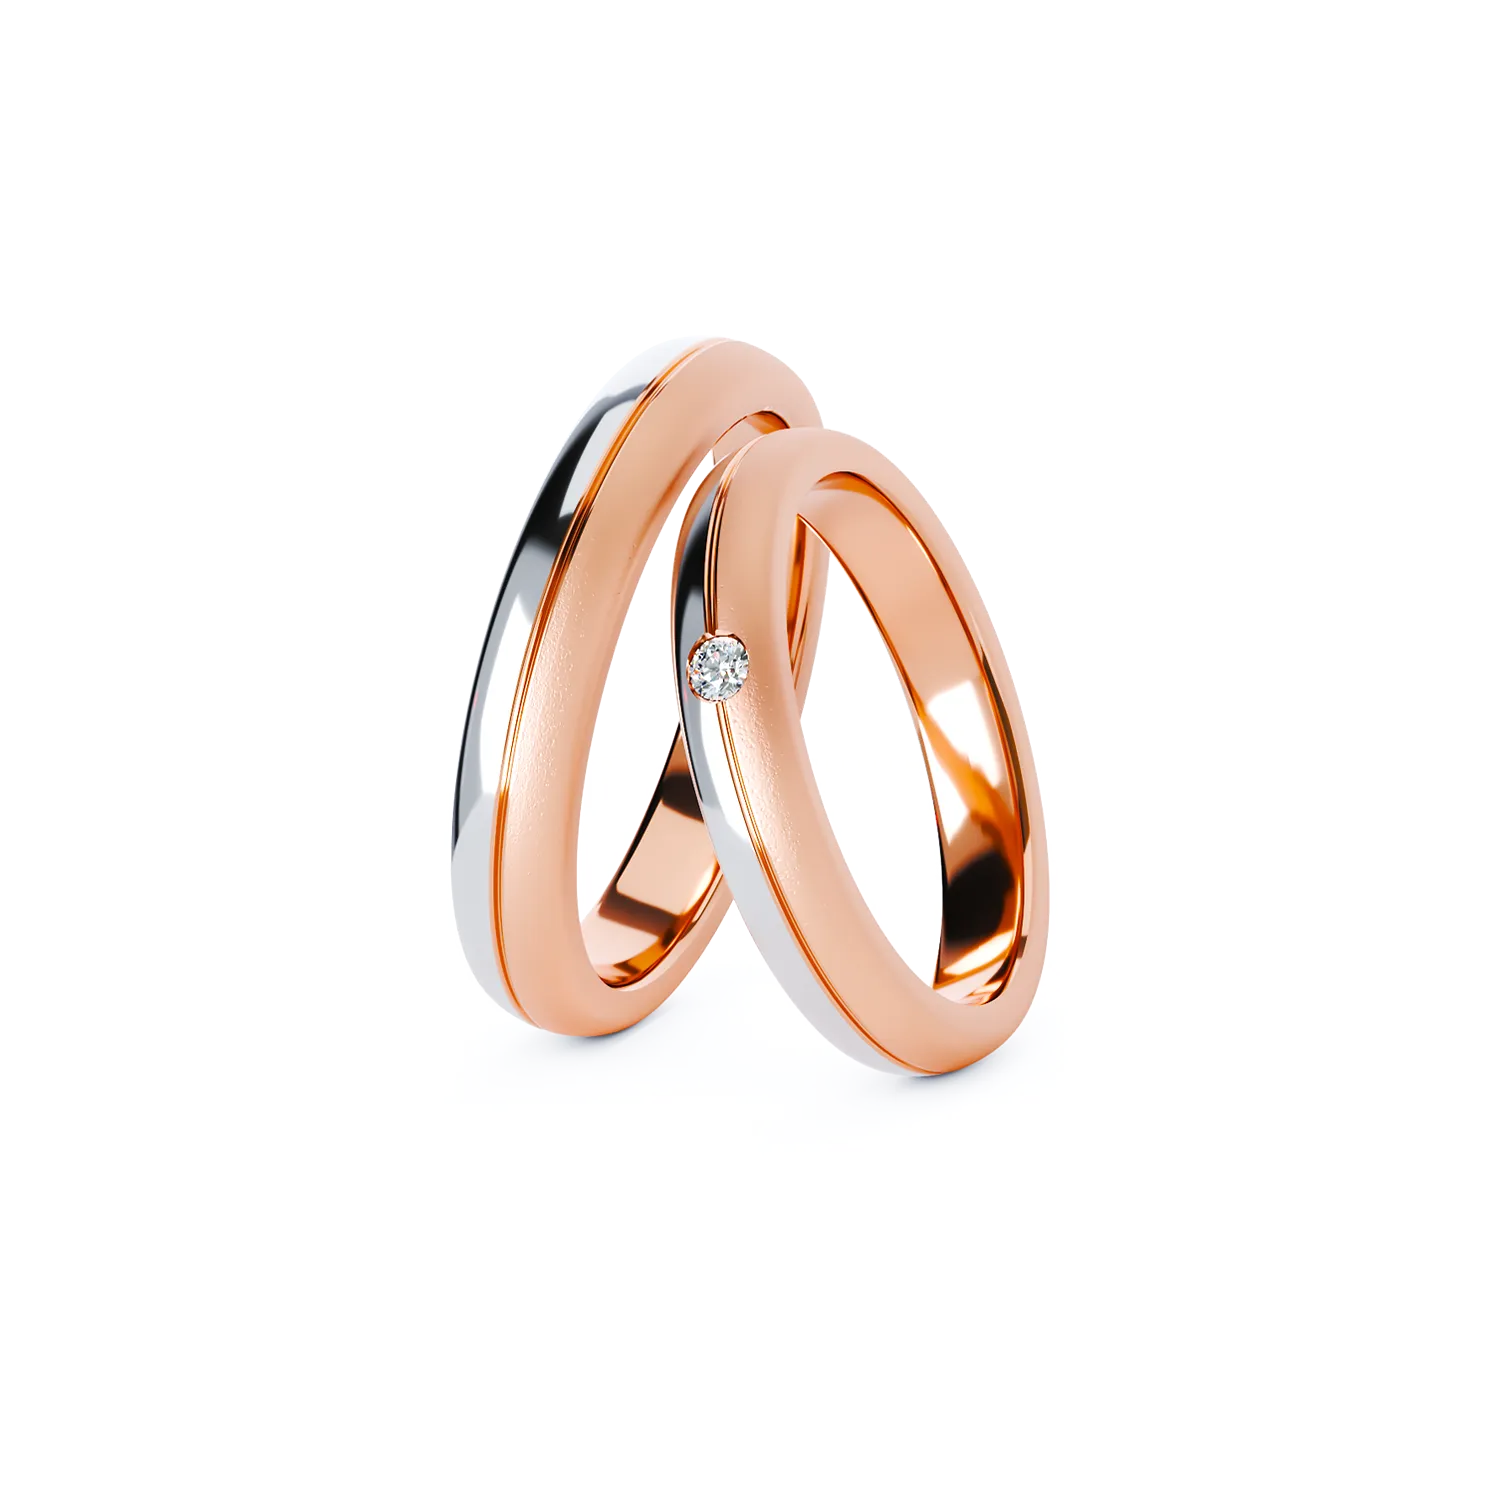 CLEO gold wedding rings